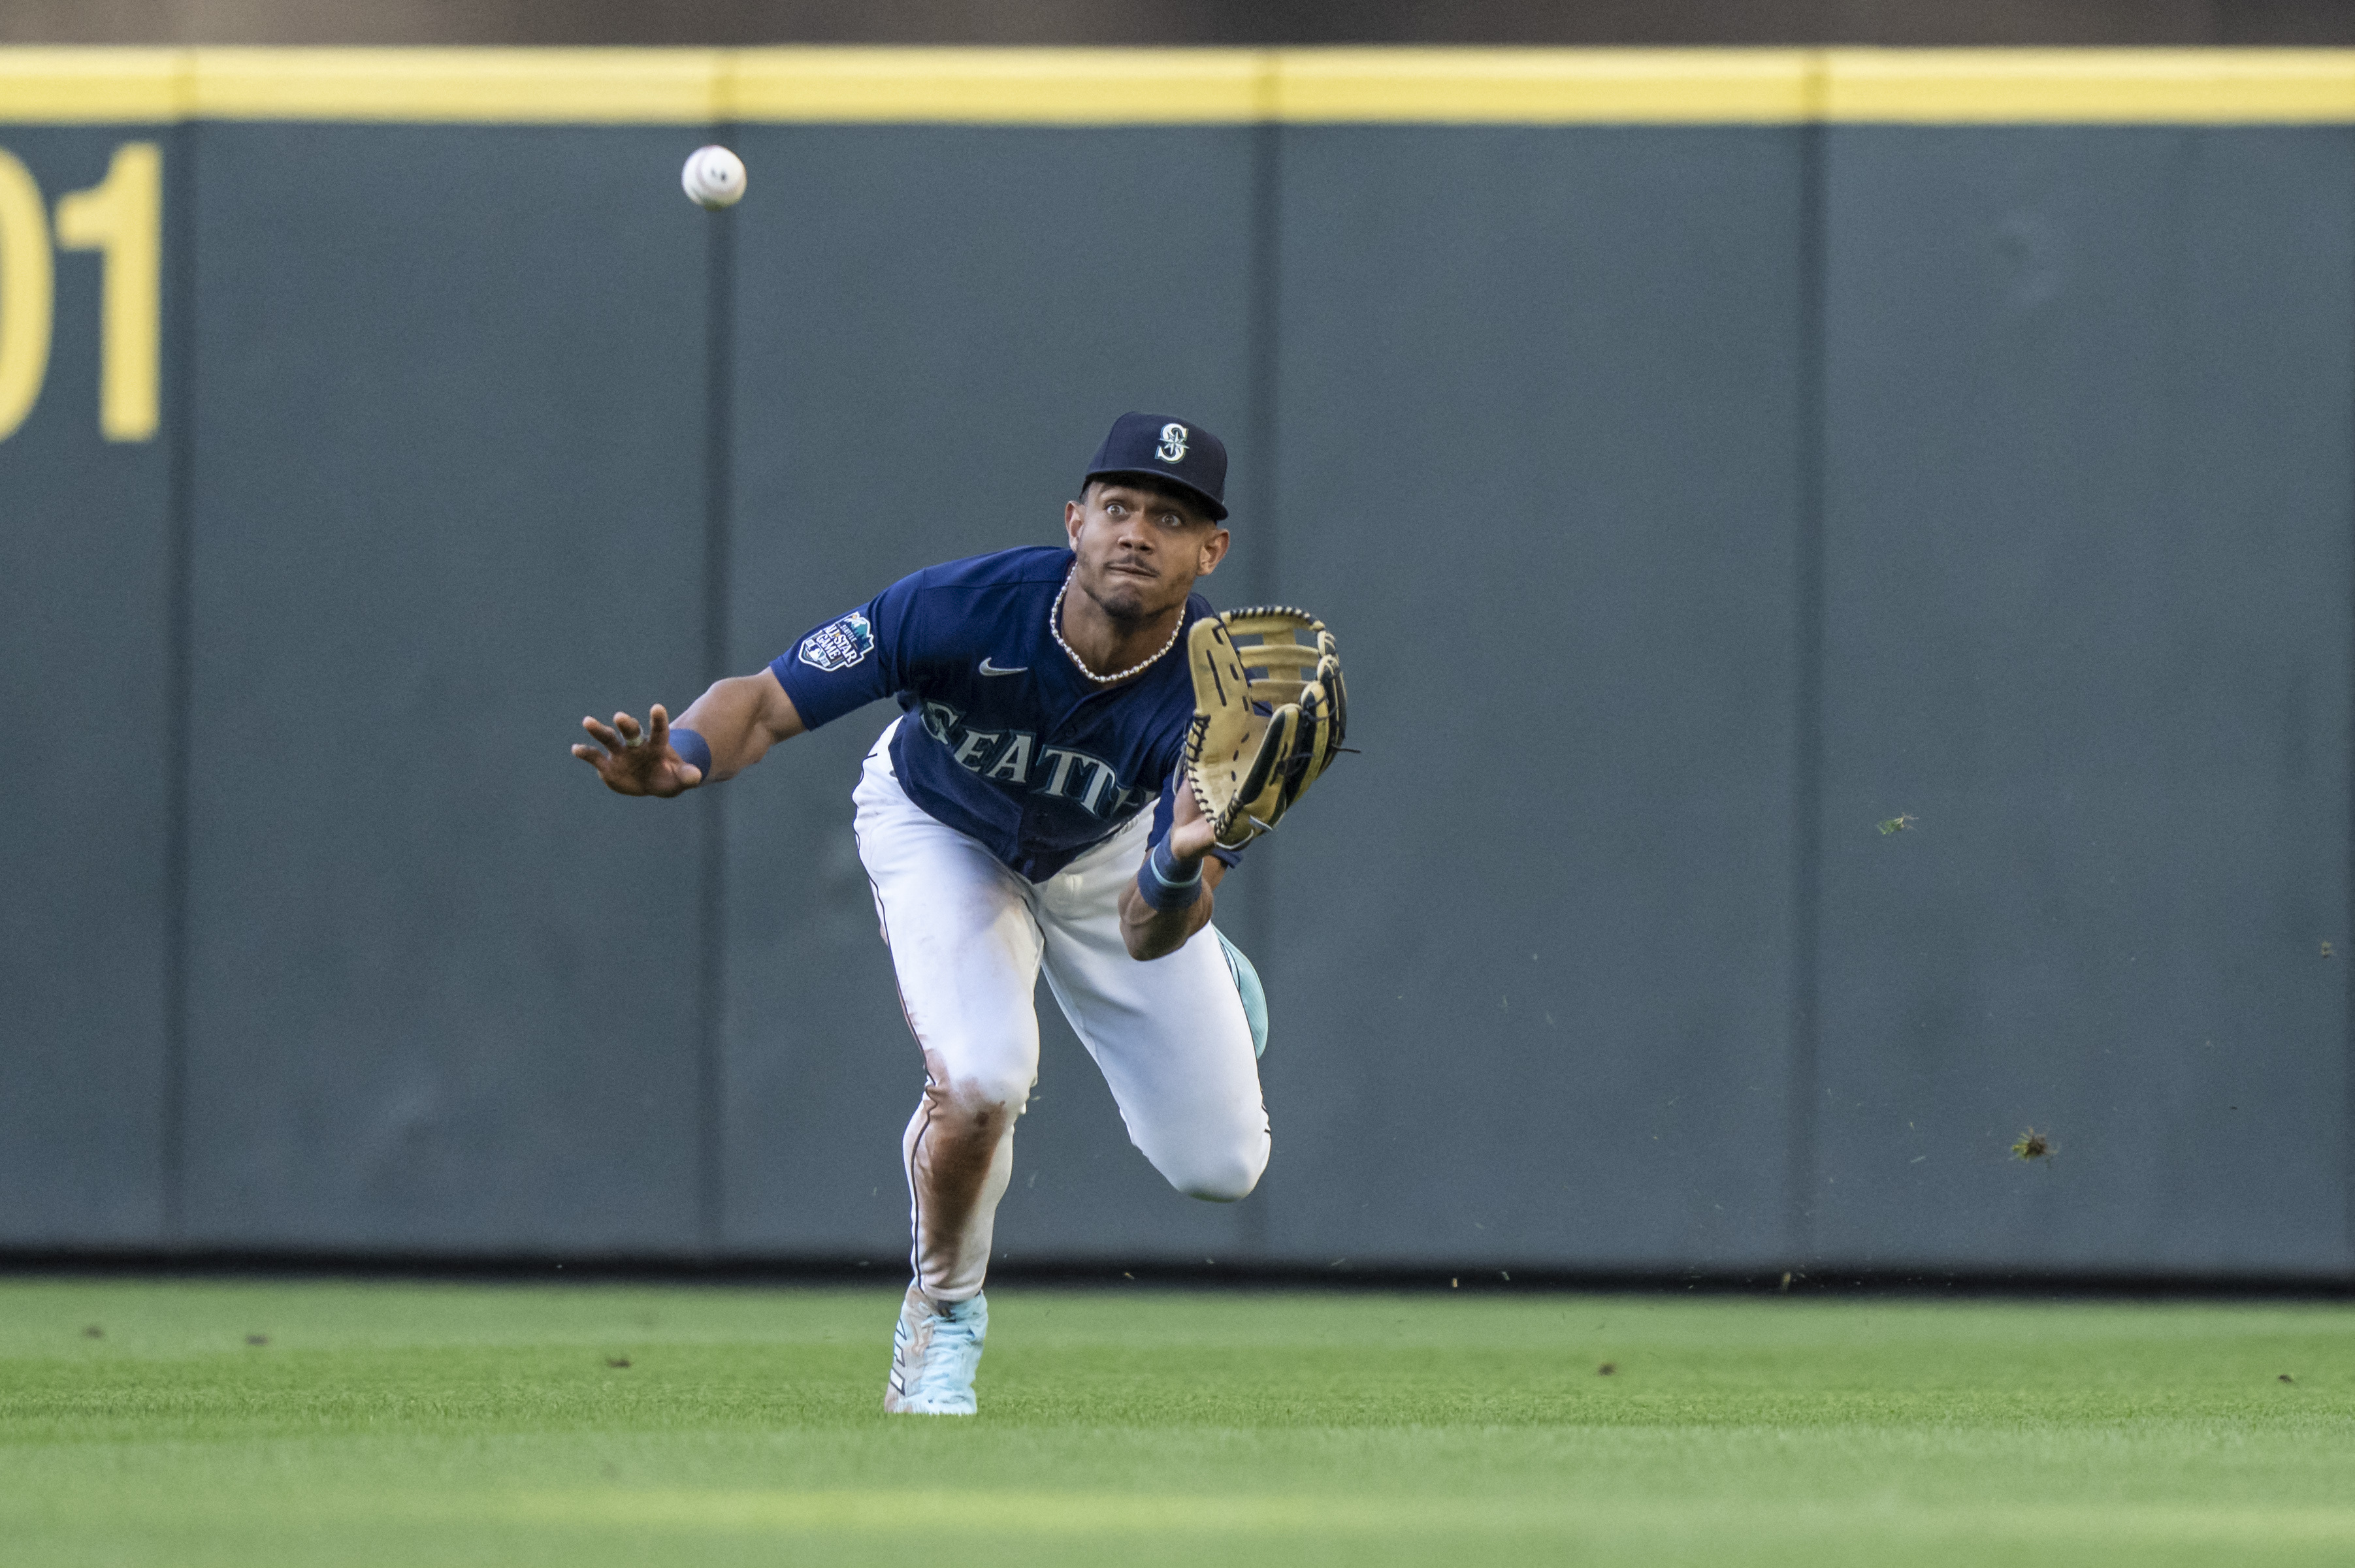 Gilbert allows just one baserunner as Mariners beat Padres for